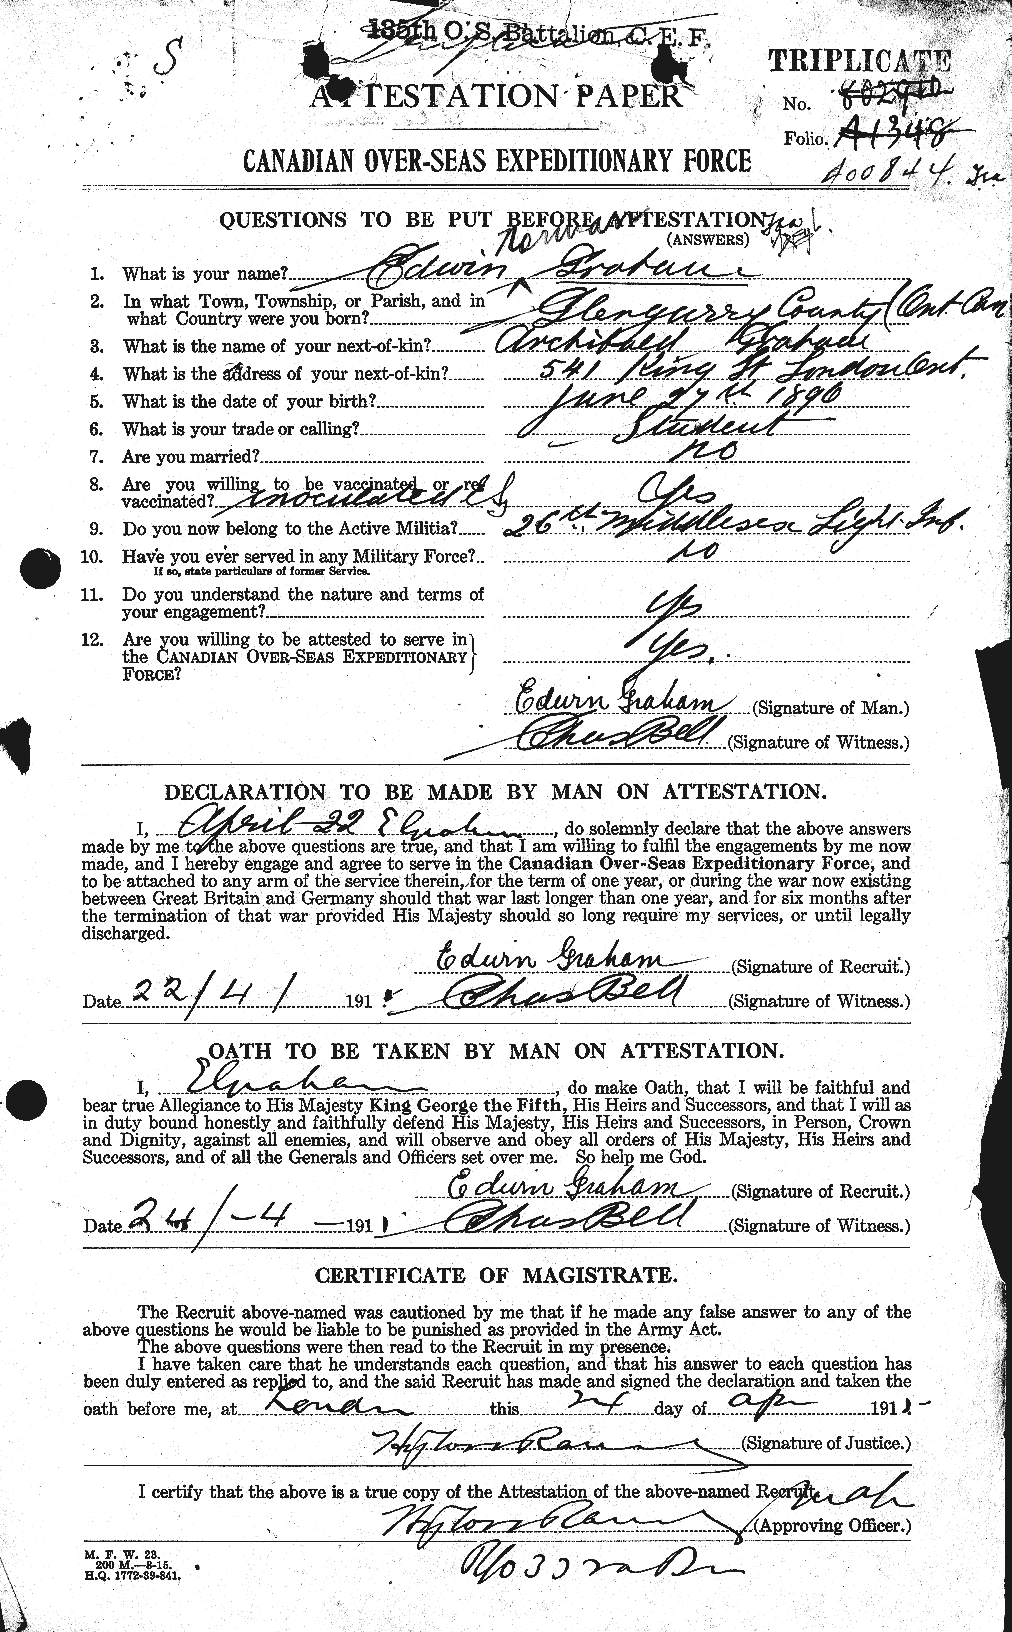 Personnel Records of the First World War - CEF 357542a